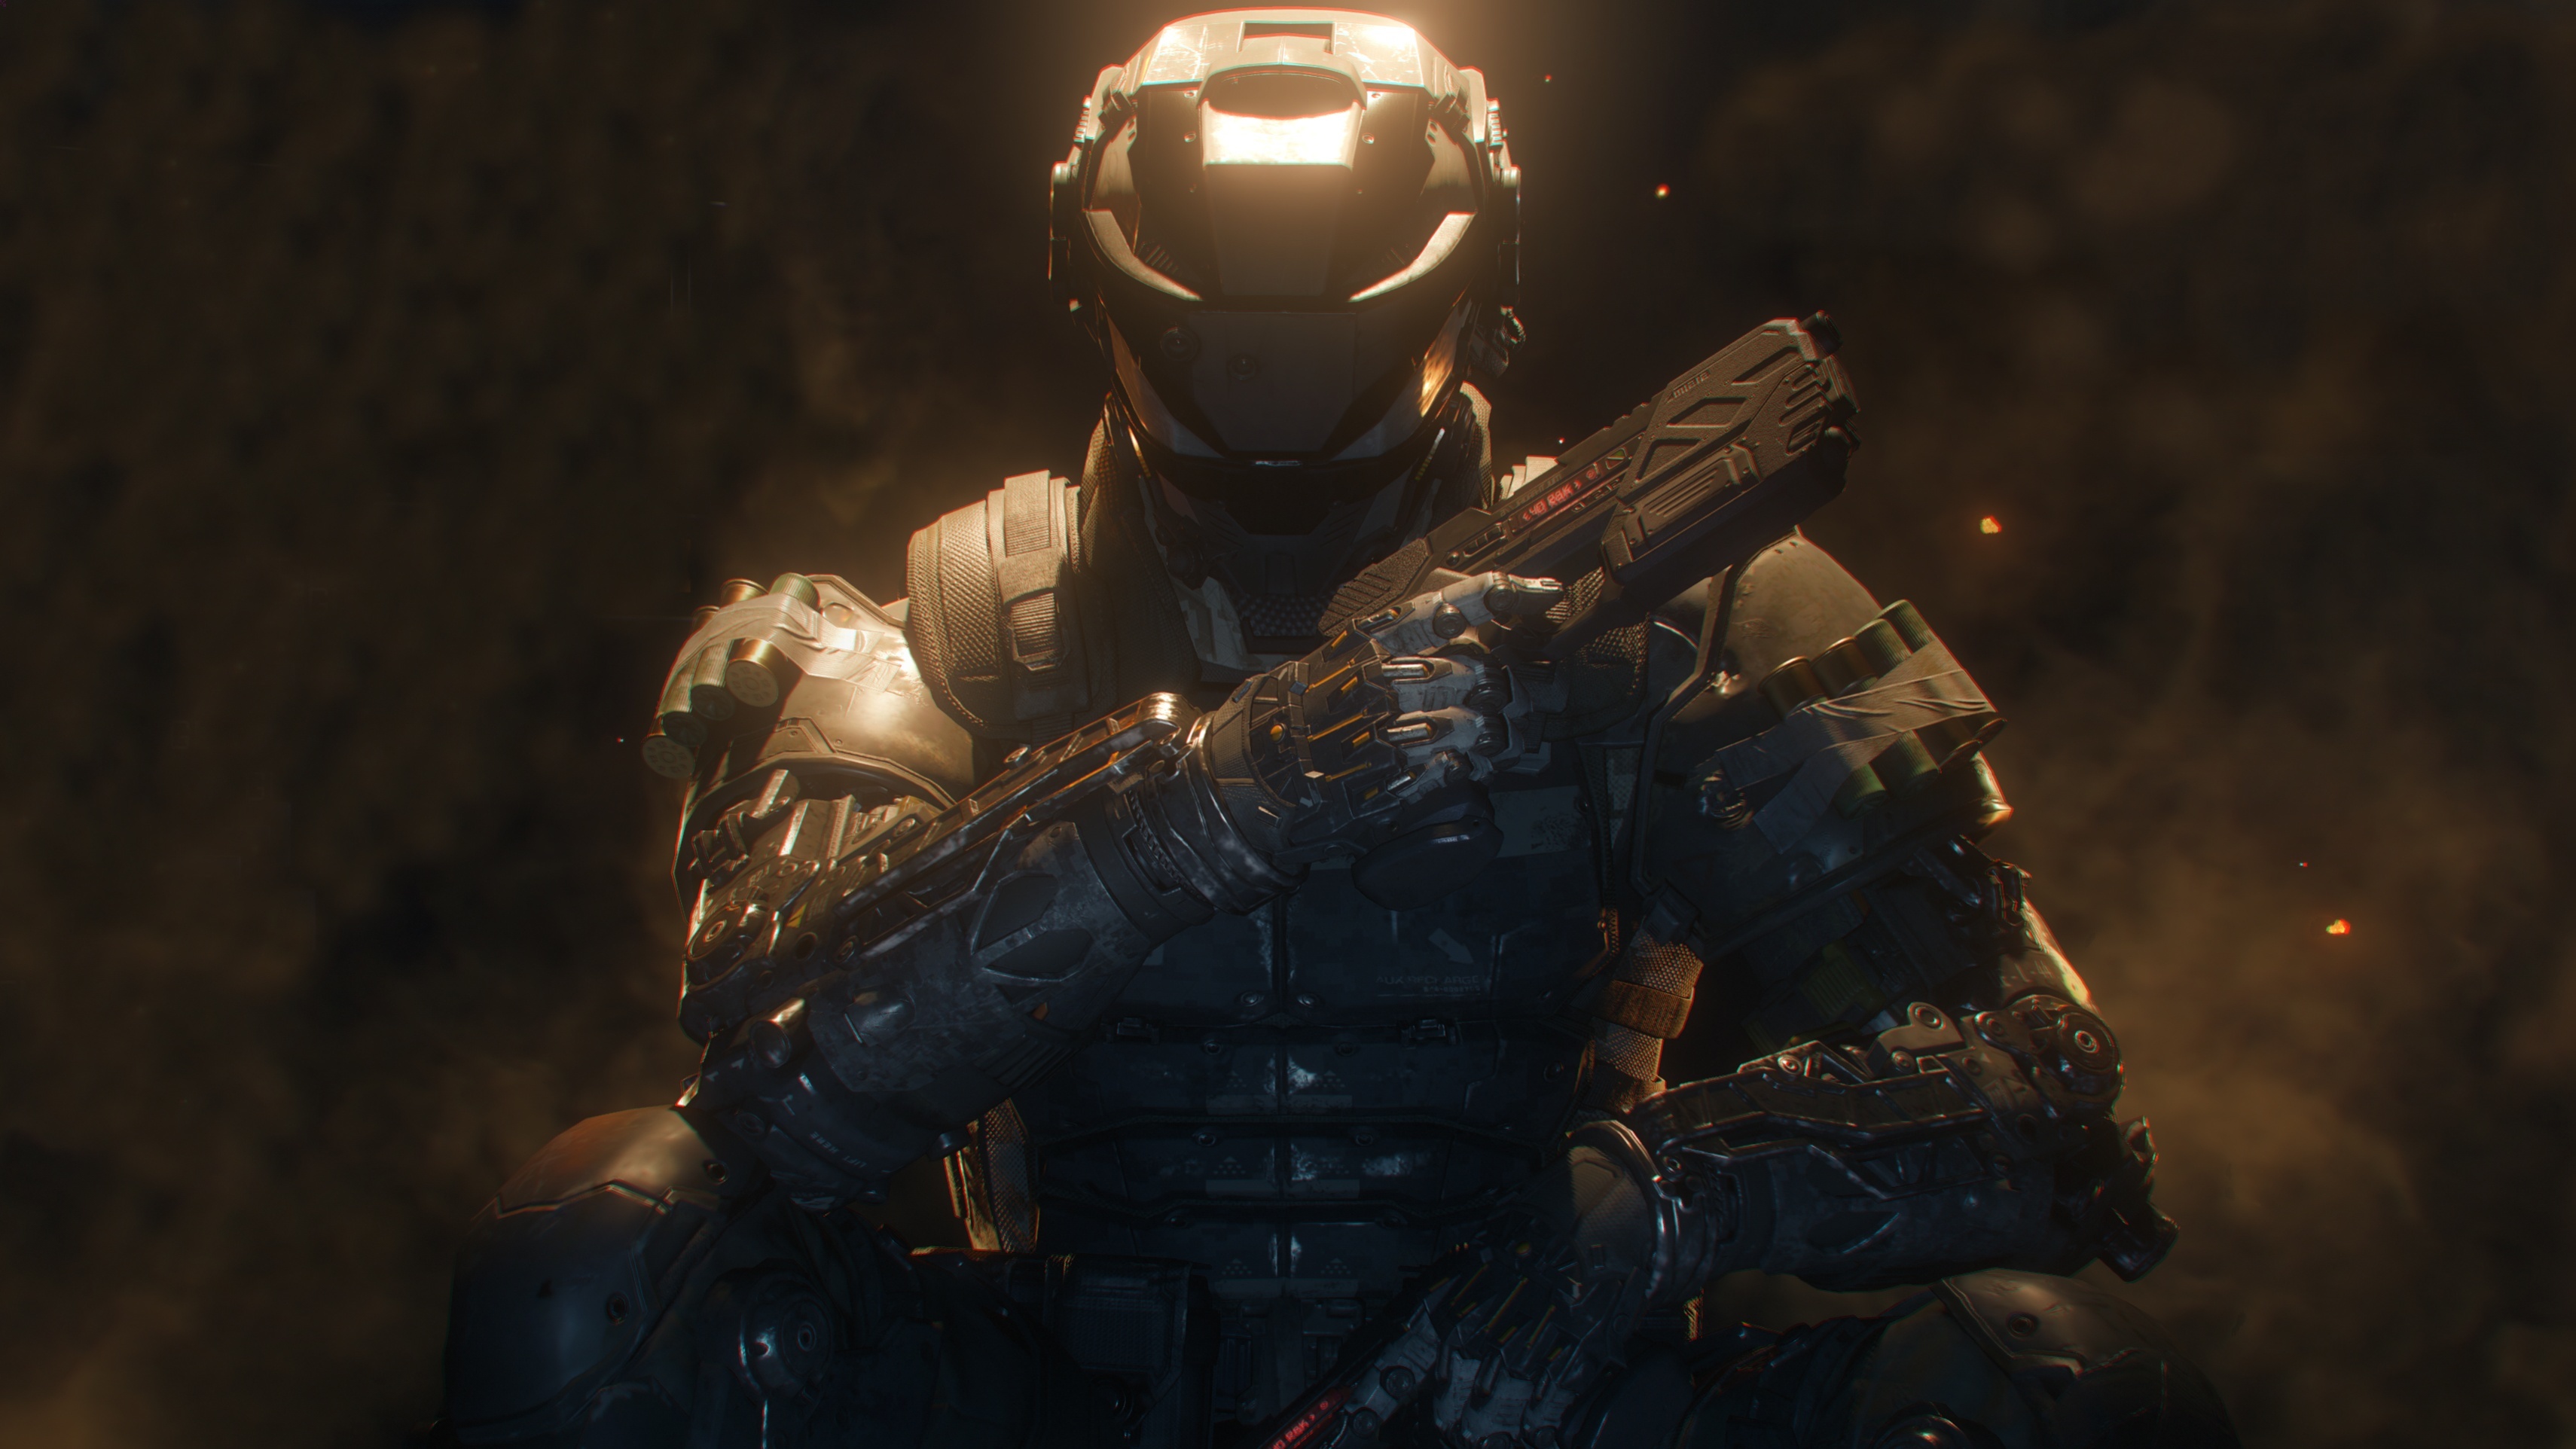 Black ops iii engrosses players in a dark and gritty future, where a new br...